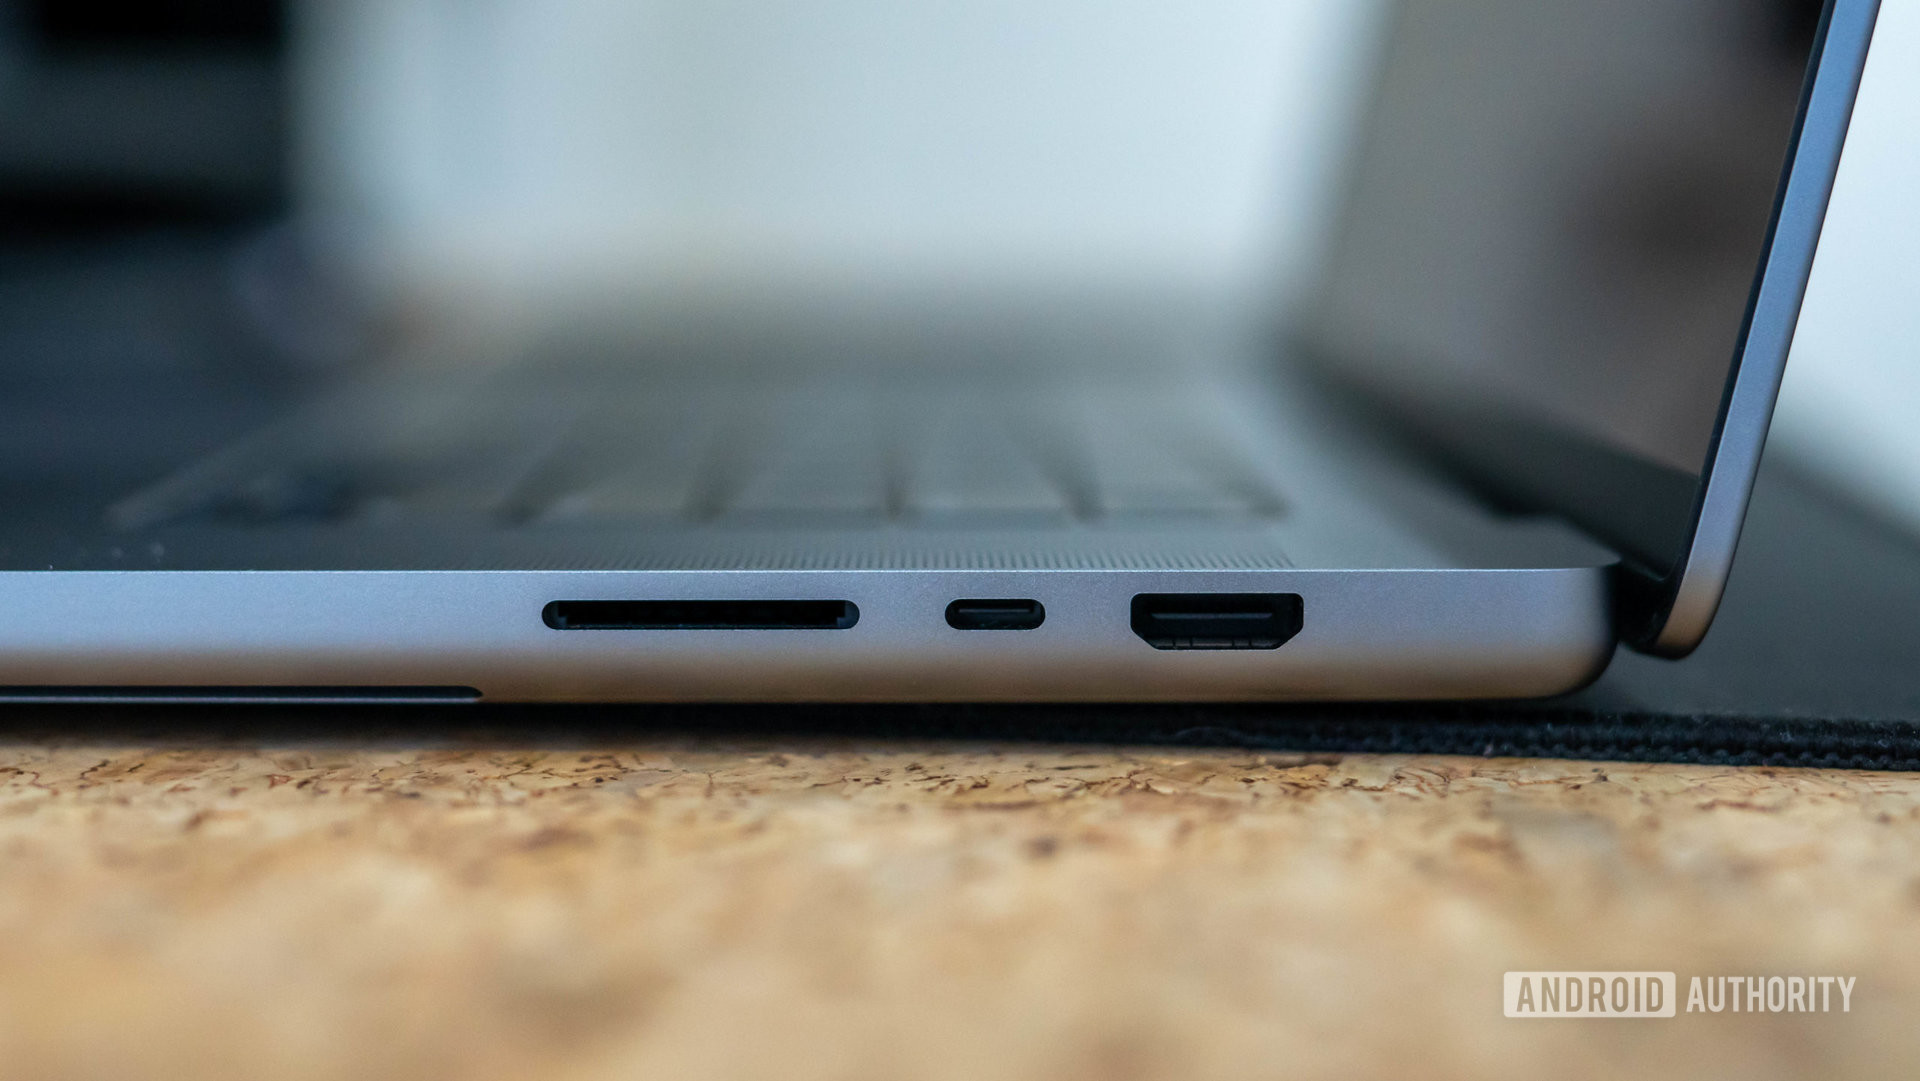 Apple MacBook Pro 2023 right siide profile showing SDXC card slot Thunderbolt 4 USB C port and HDMI 2.1 port